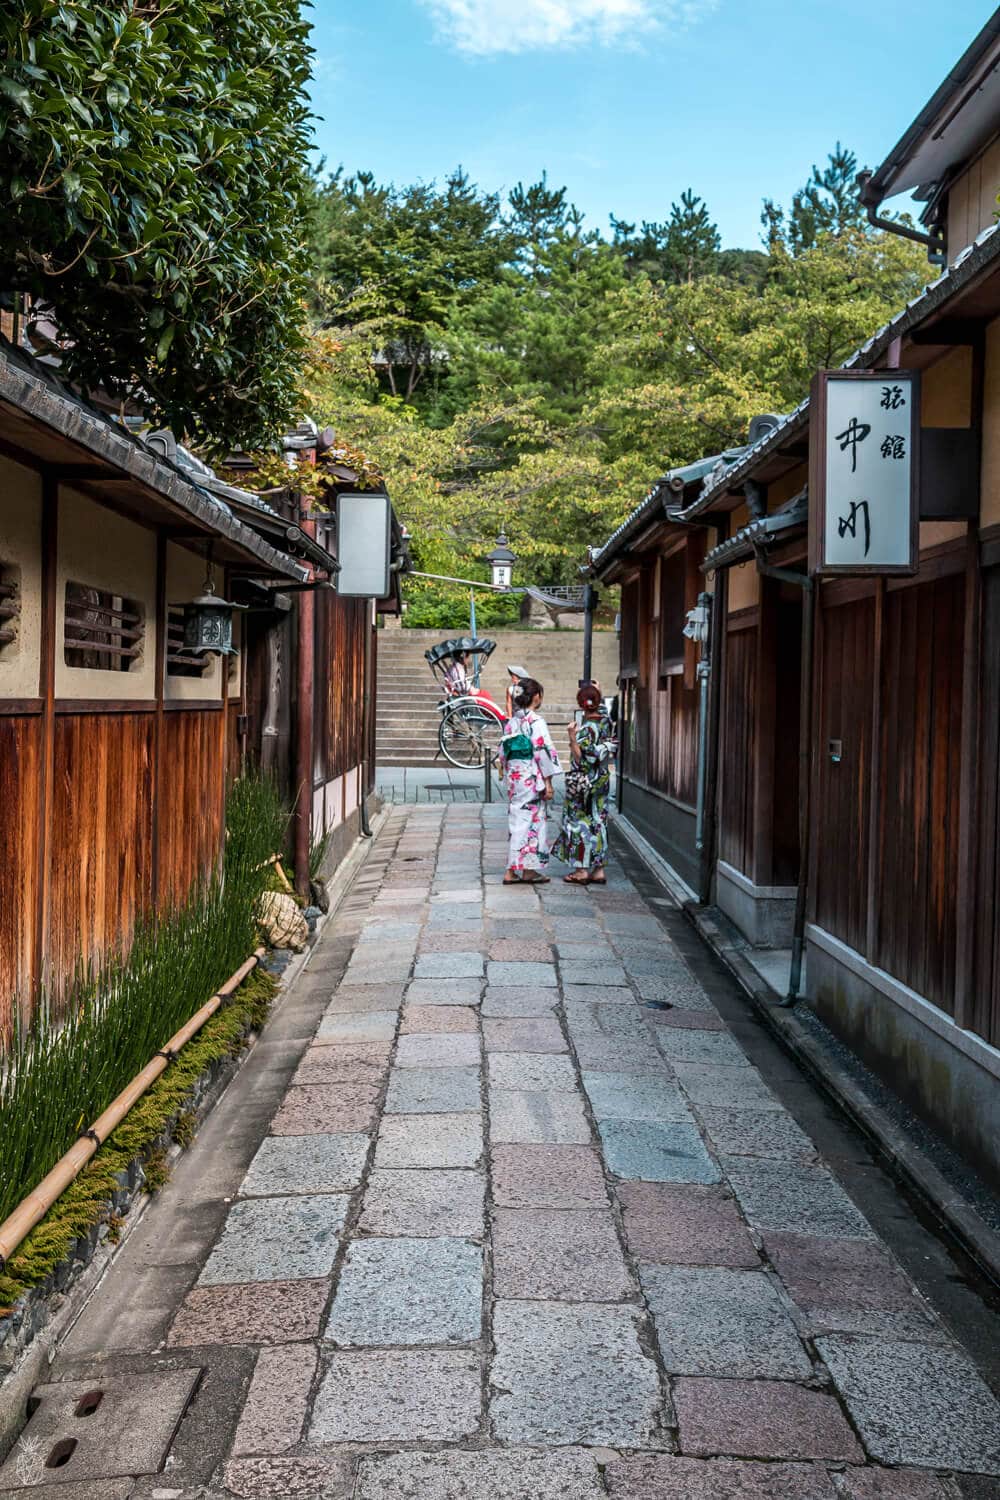 20 Photos to Inspire You to Visit Kyoto Japan | Gion